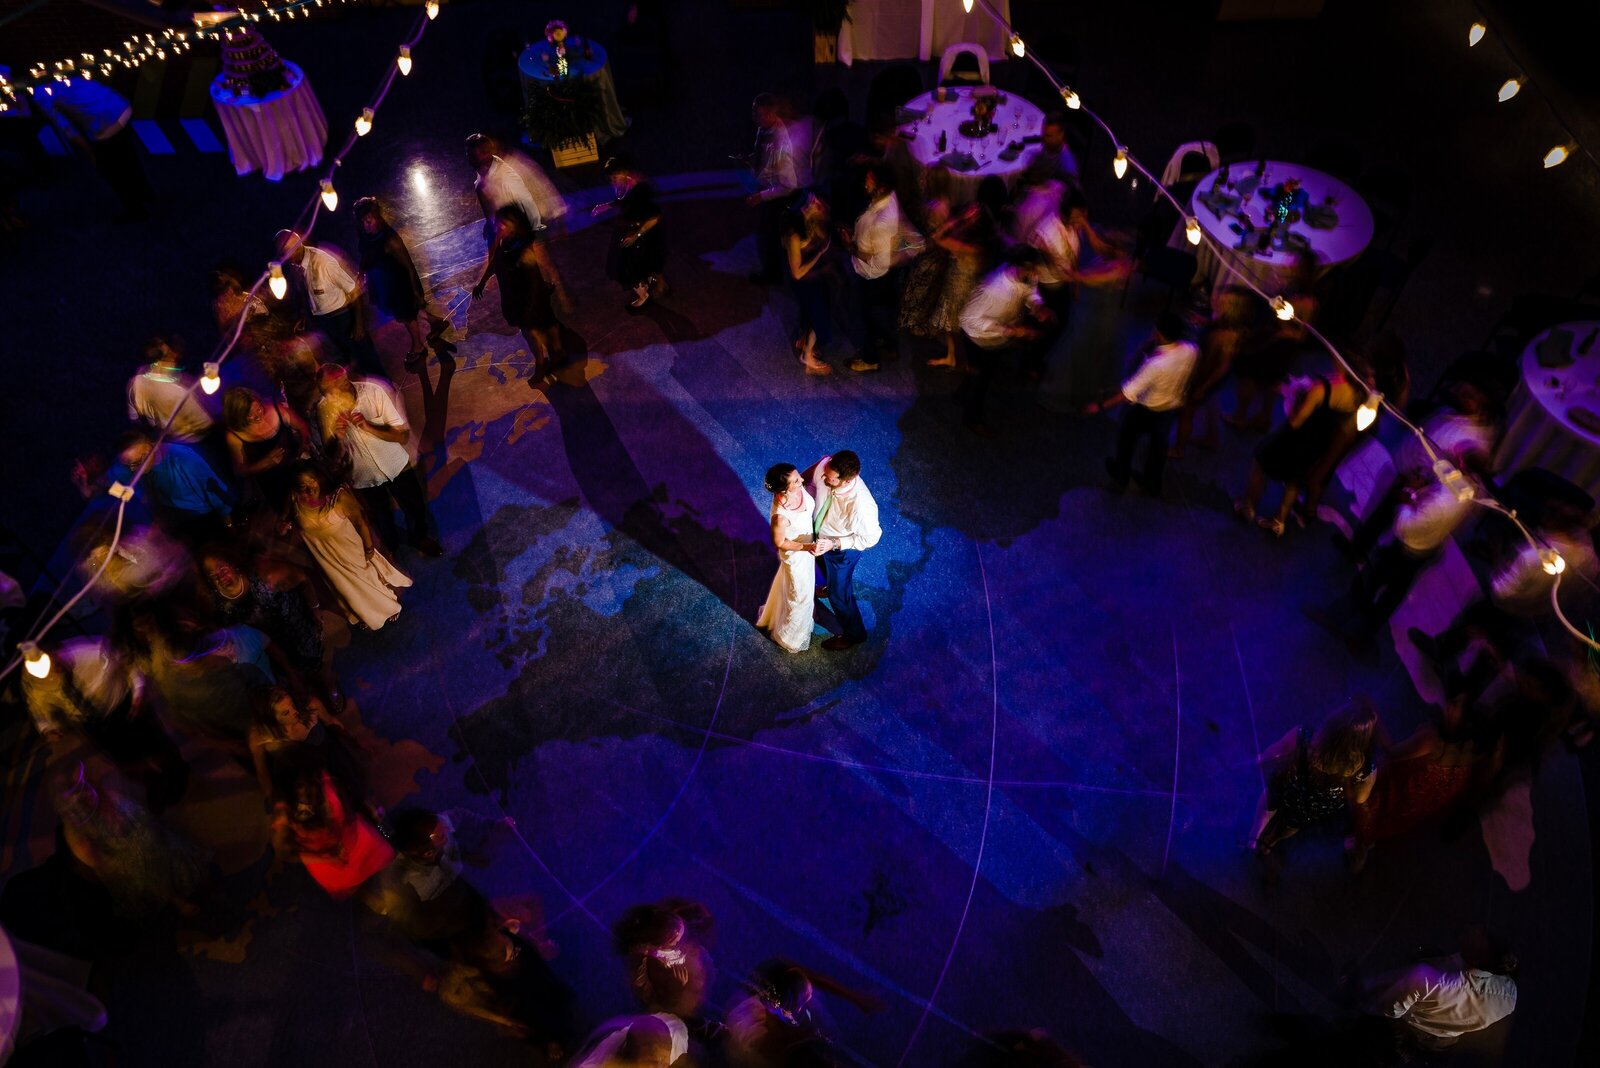 photo of a couple's first dance at their wedding taken from a catwalk above the dance floor